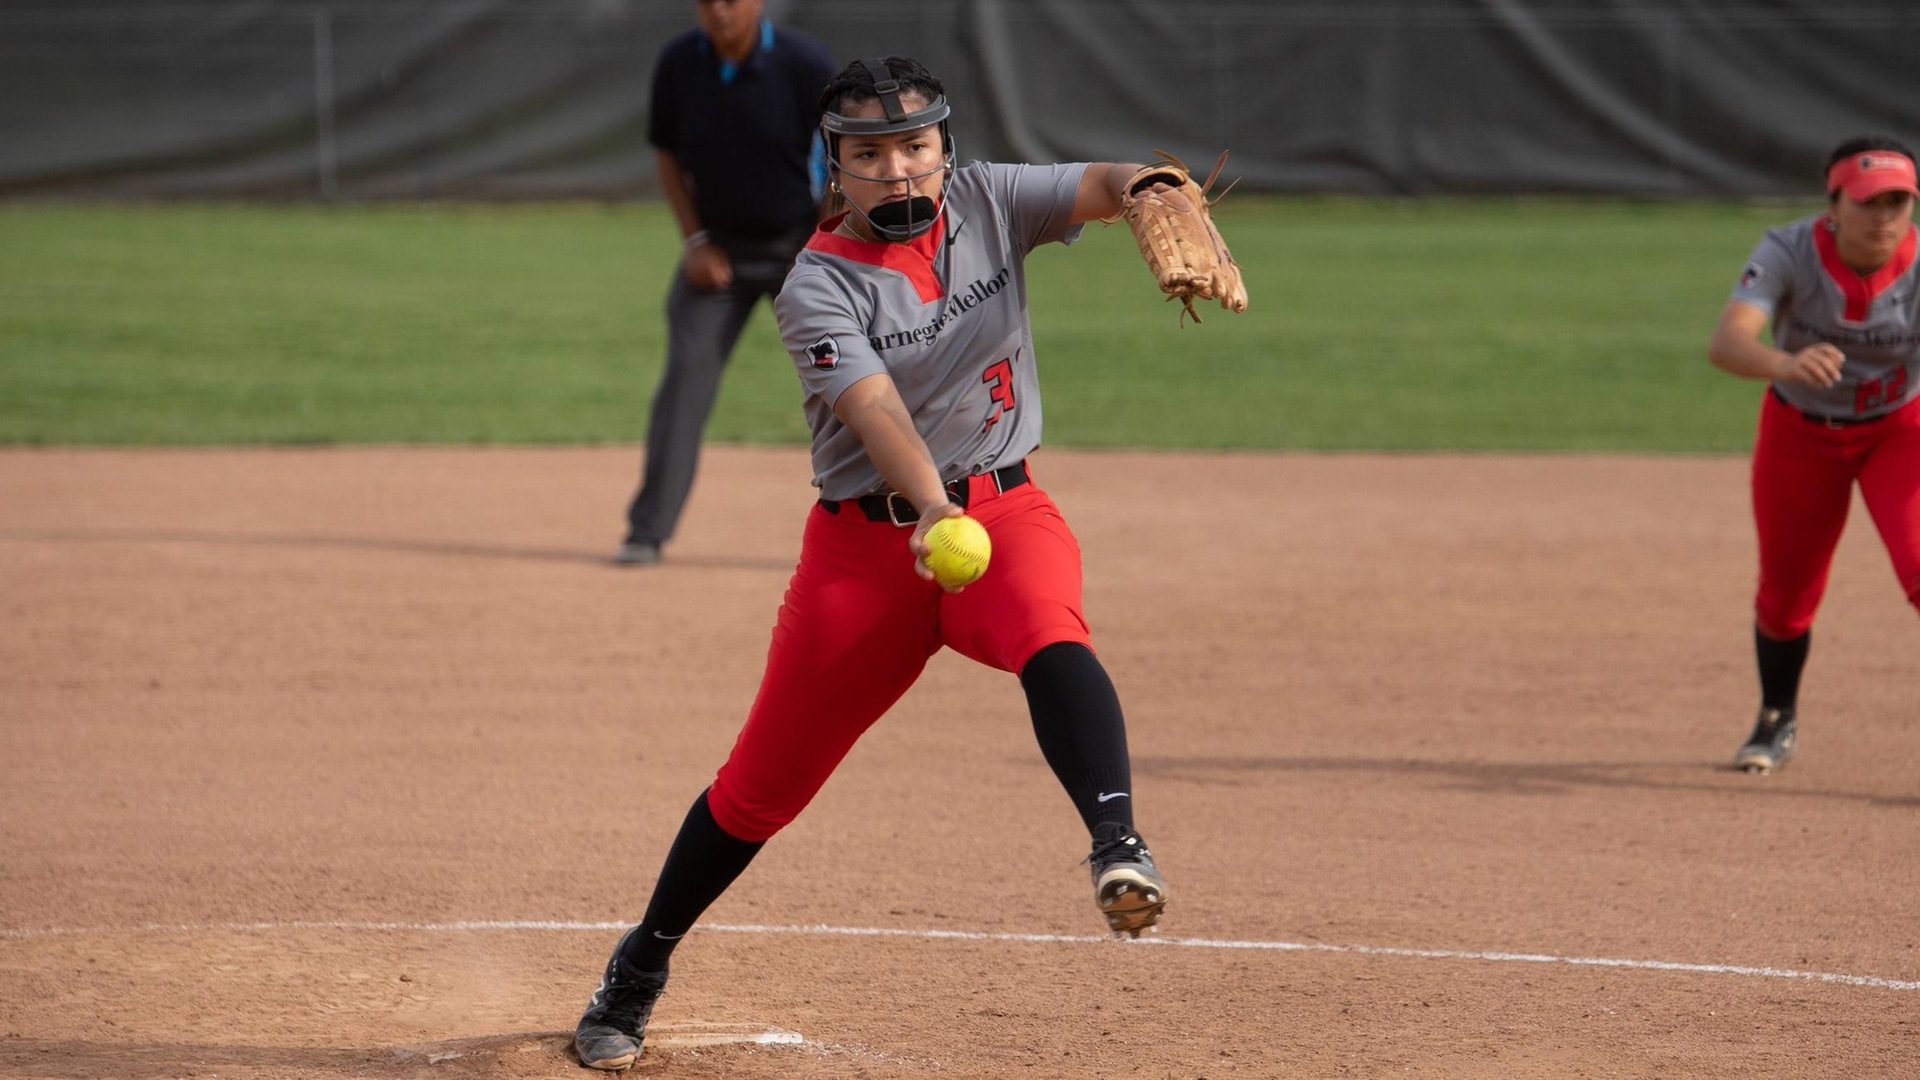 women's softball pitcher in mid-motion about to release pitch